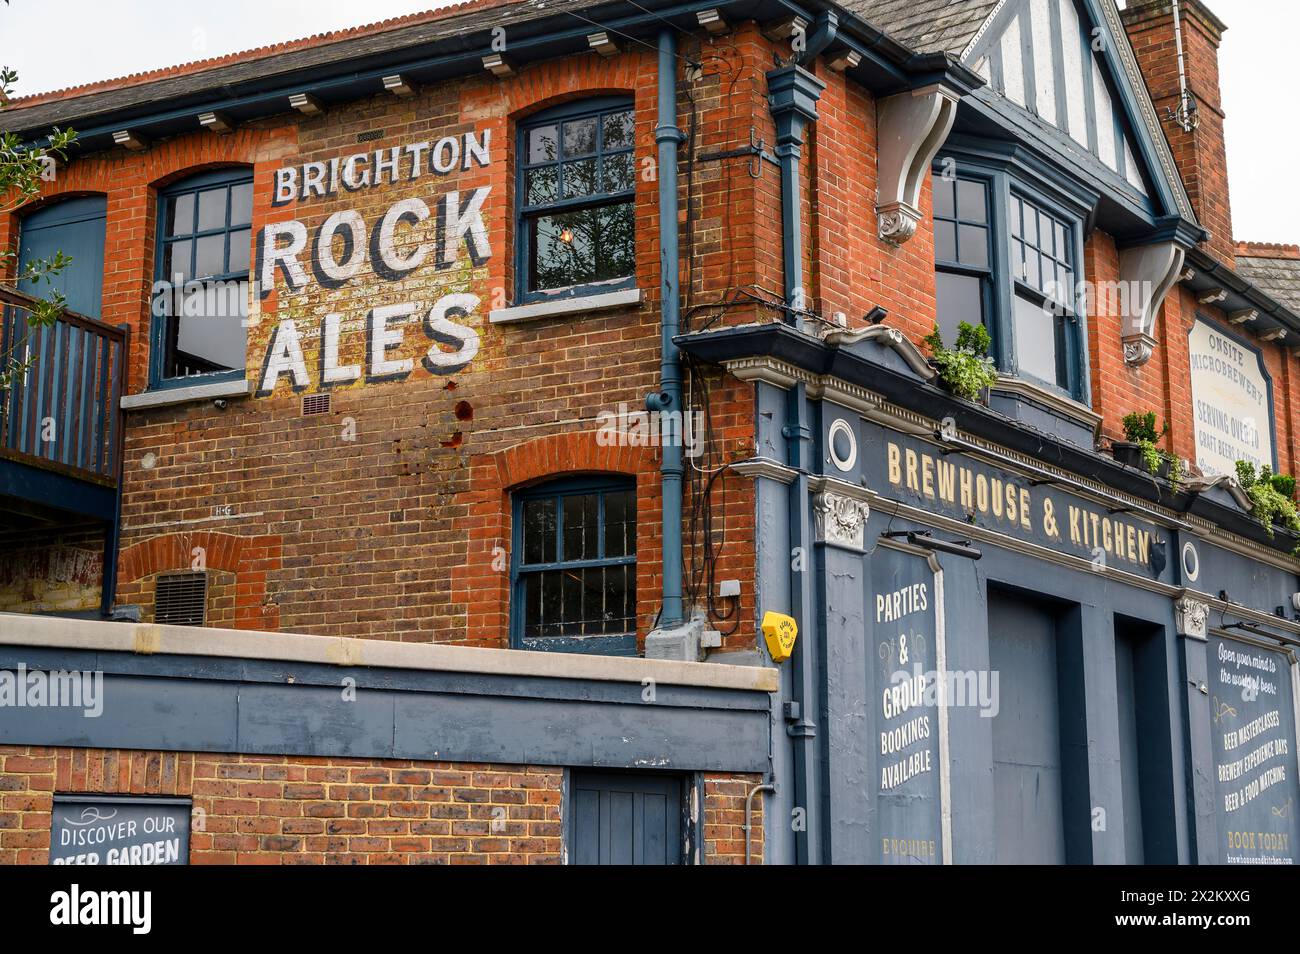 The Brewhouse & Kitchen building with hand painted vintage advert, is a craft beer pub and restaurant in Horsham market town in West Sussex, England. Stock Photo